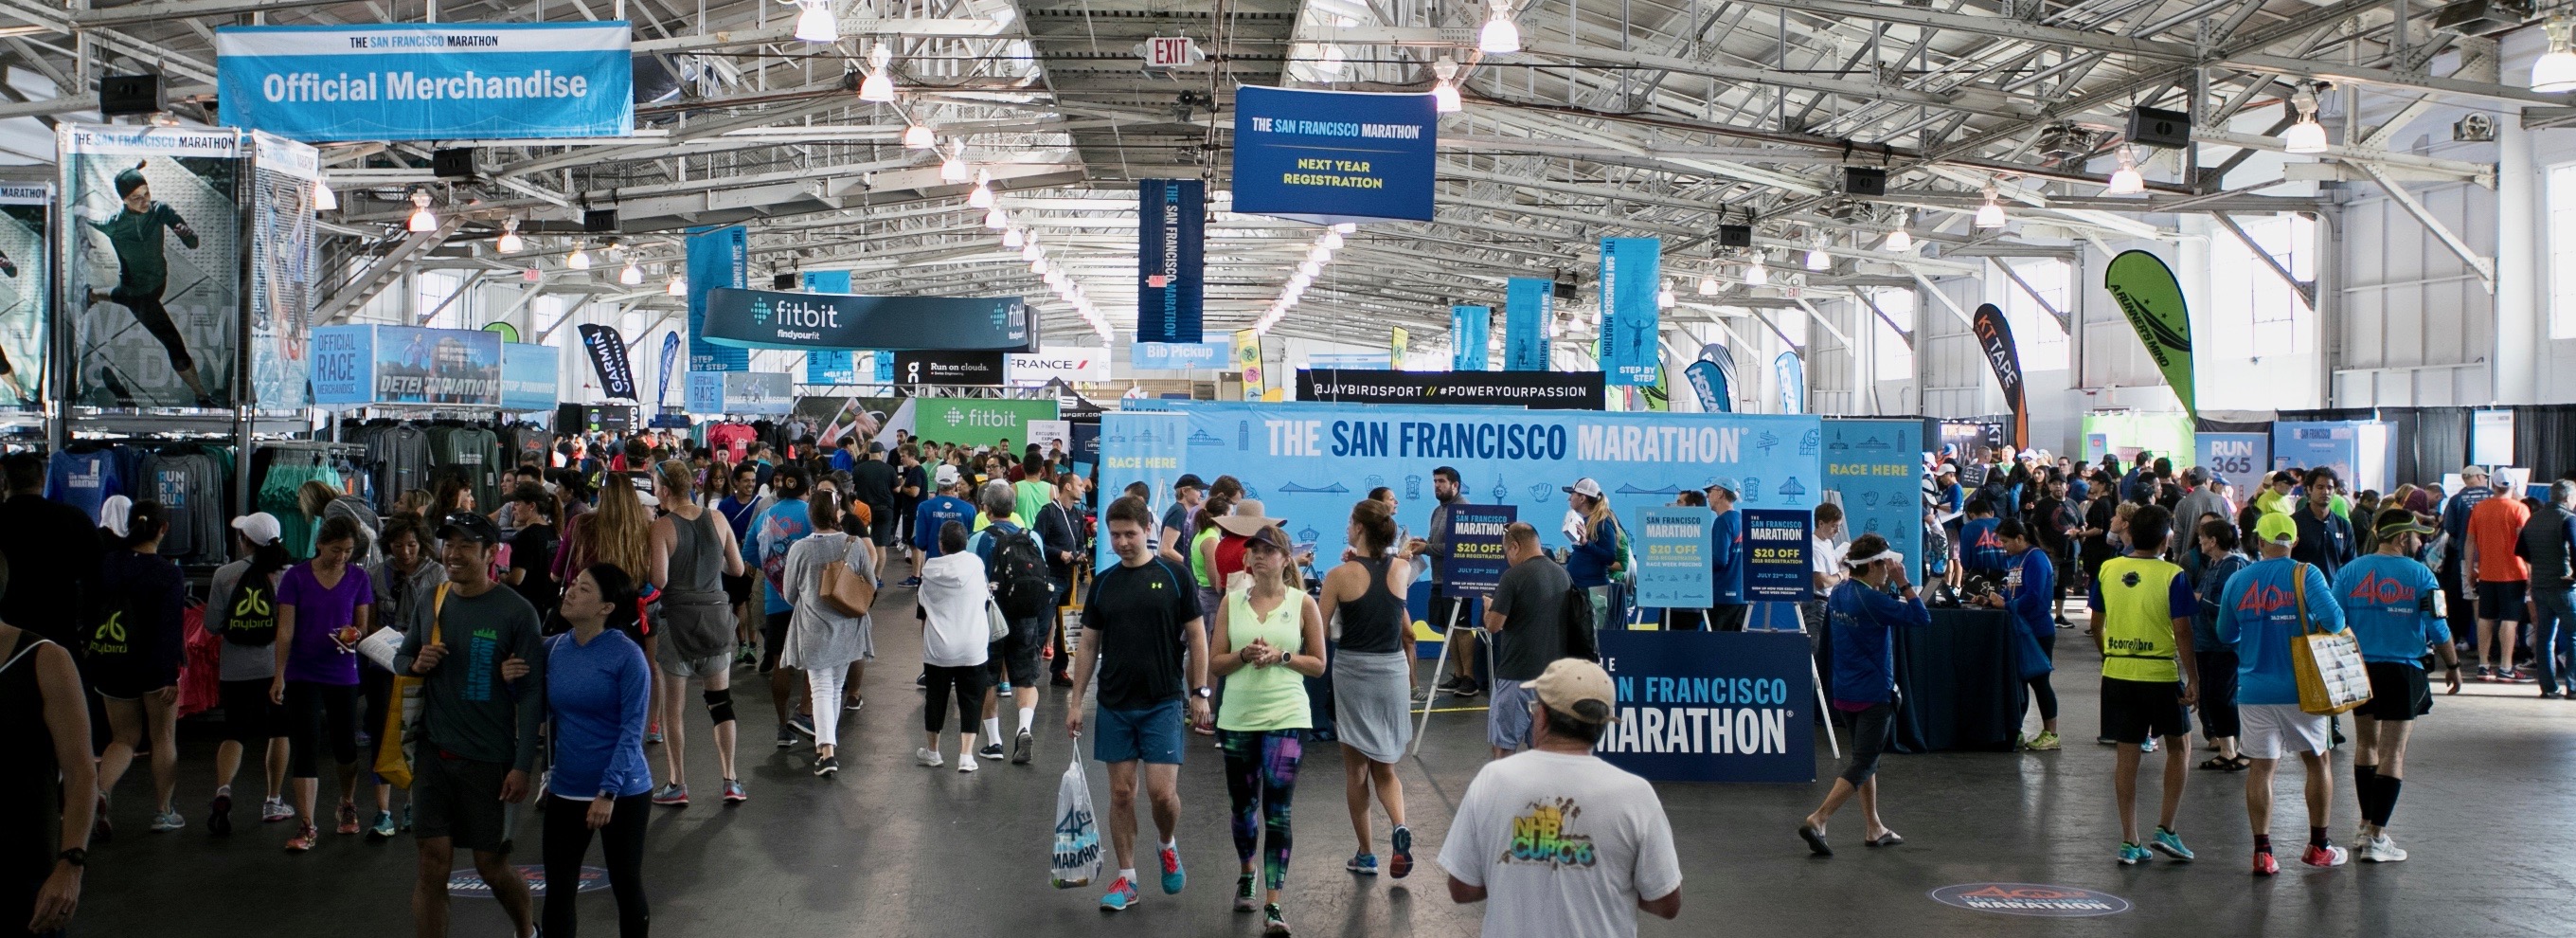 events locker Helps The San Francisco Marathon Improve Their Time With